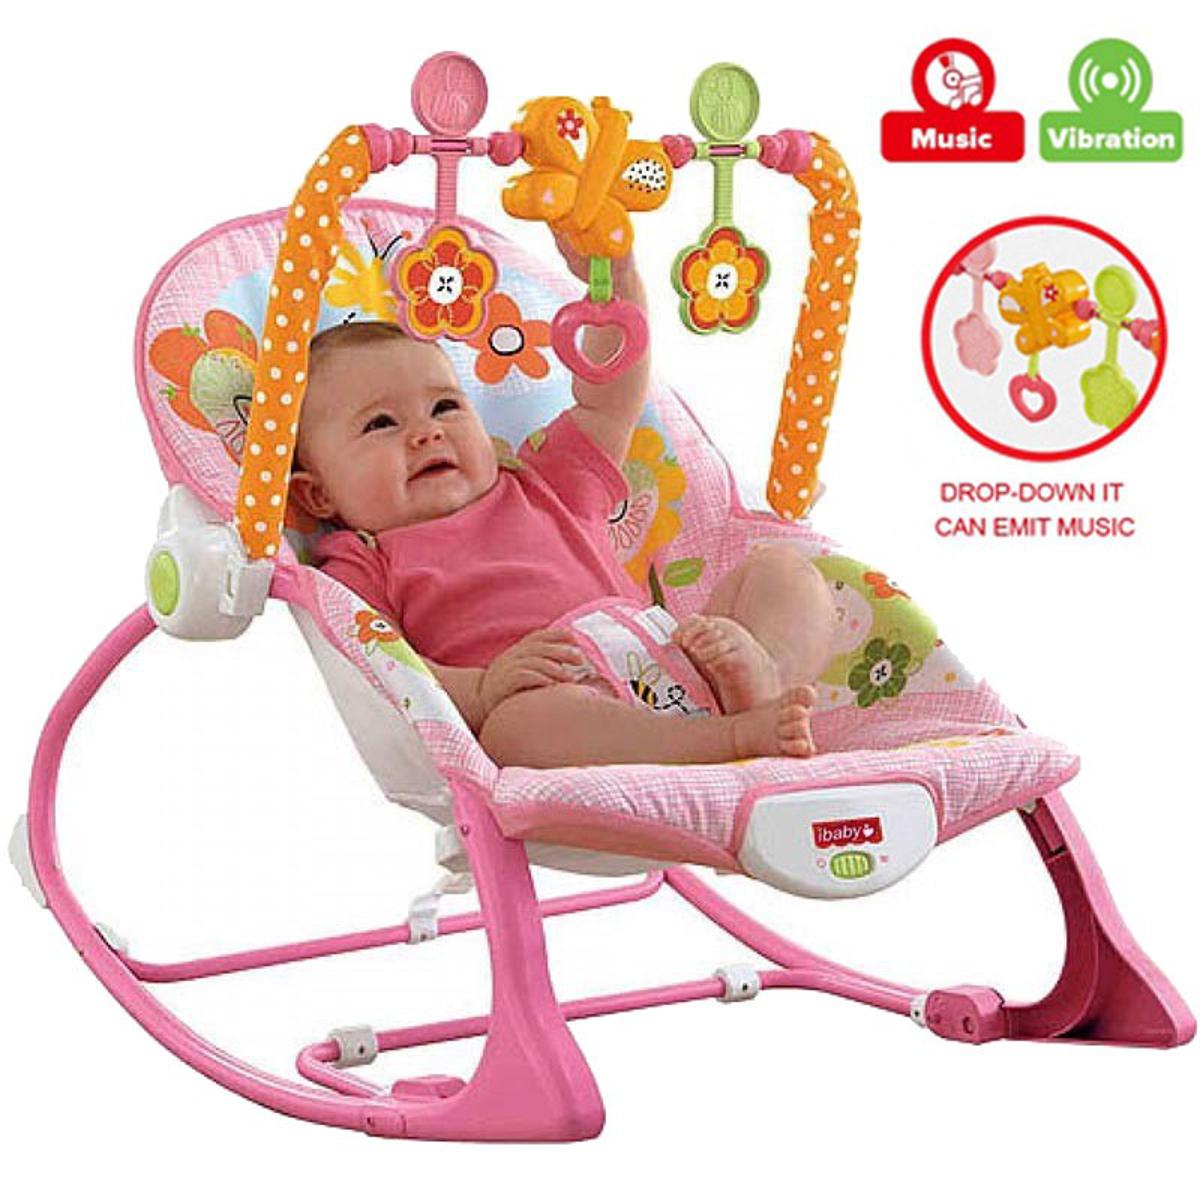 Premium TiiBaby Infant to Toddler Rocker with Vibration